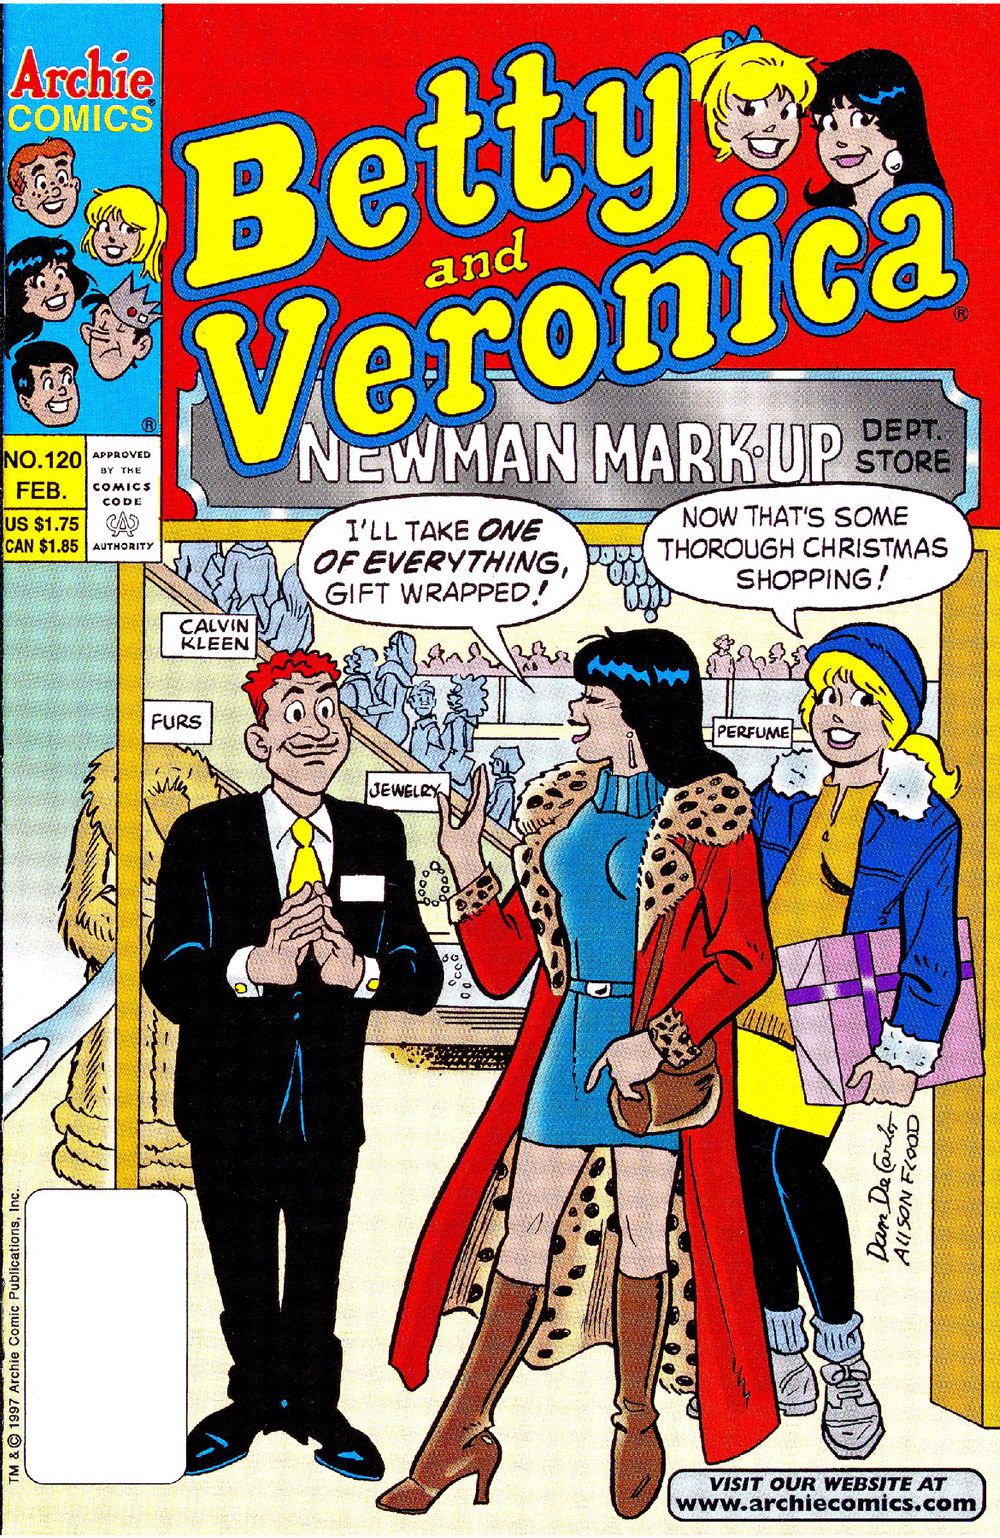 Cover of BETTY AND VERONICA #120. Betty and Veronica are Christmas shopping at an expensive department store.